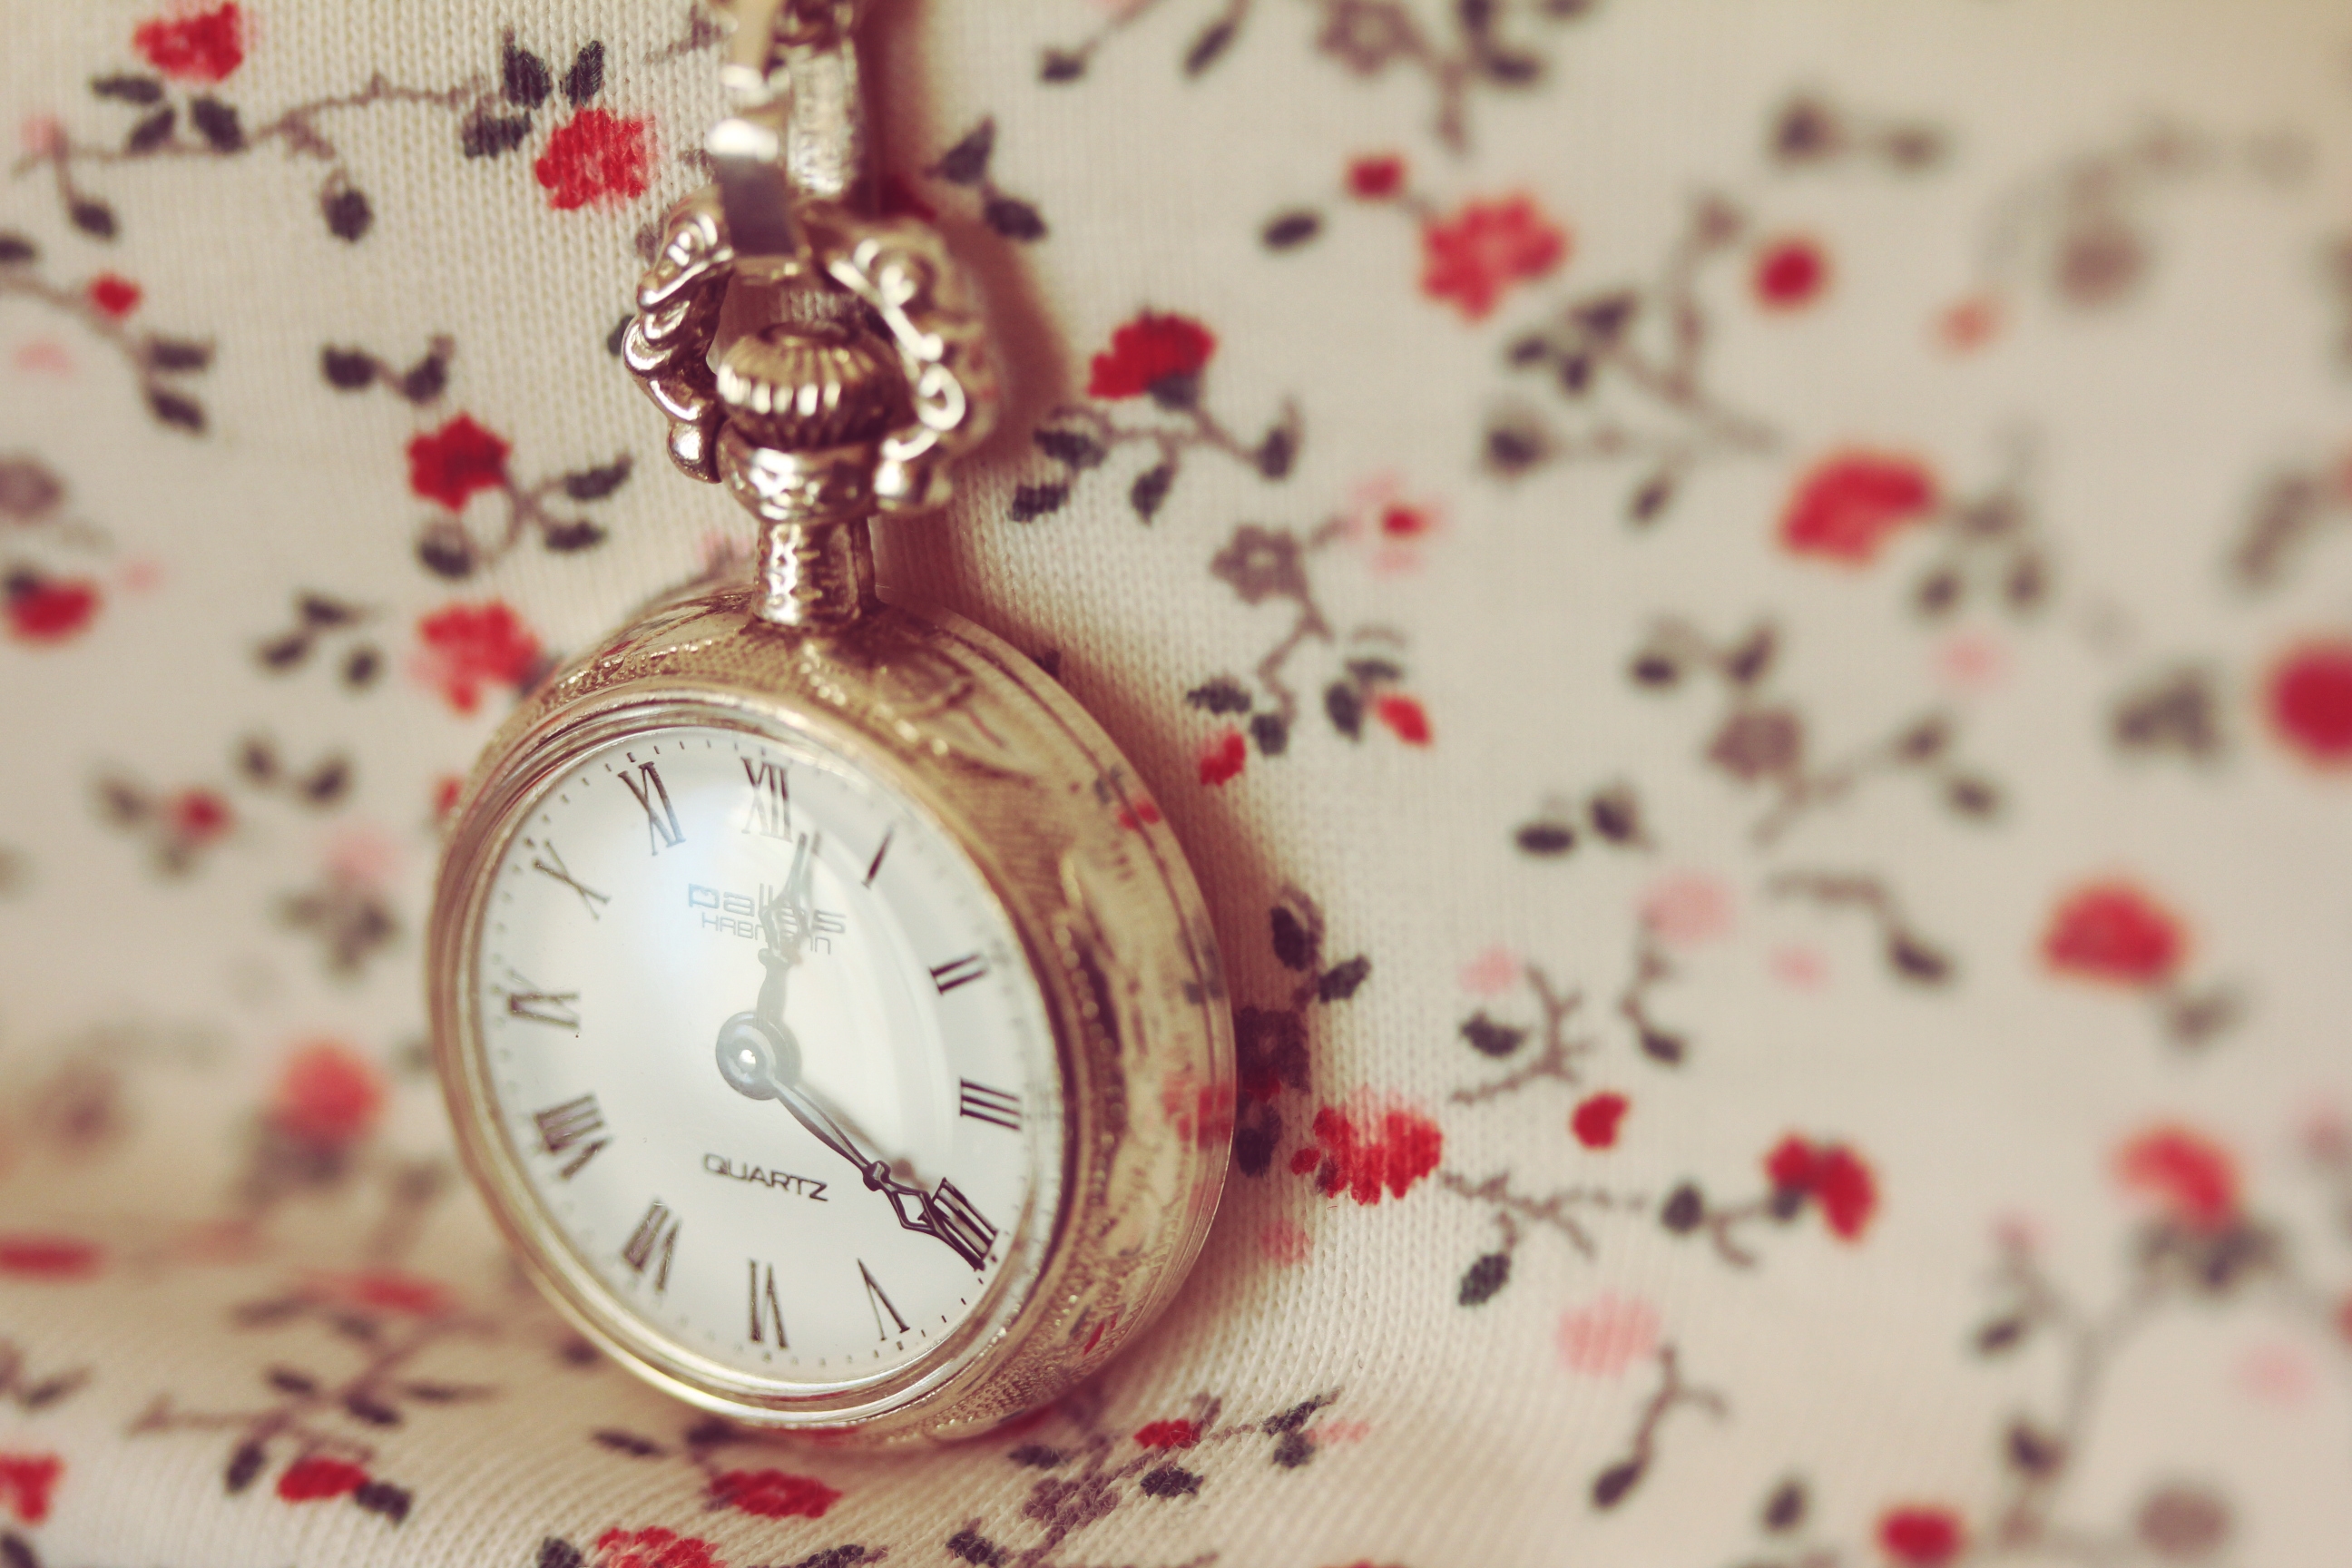 miscellanea, miscellaneous, registration, typography, style, pocket watch, convenience